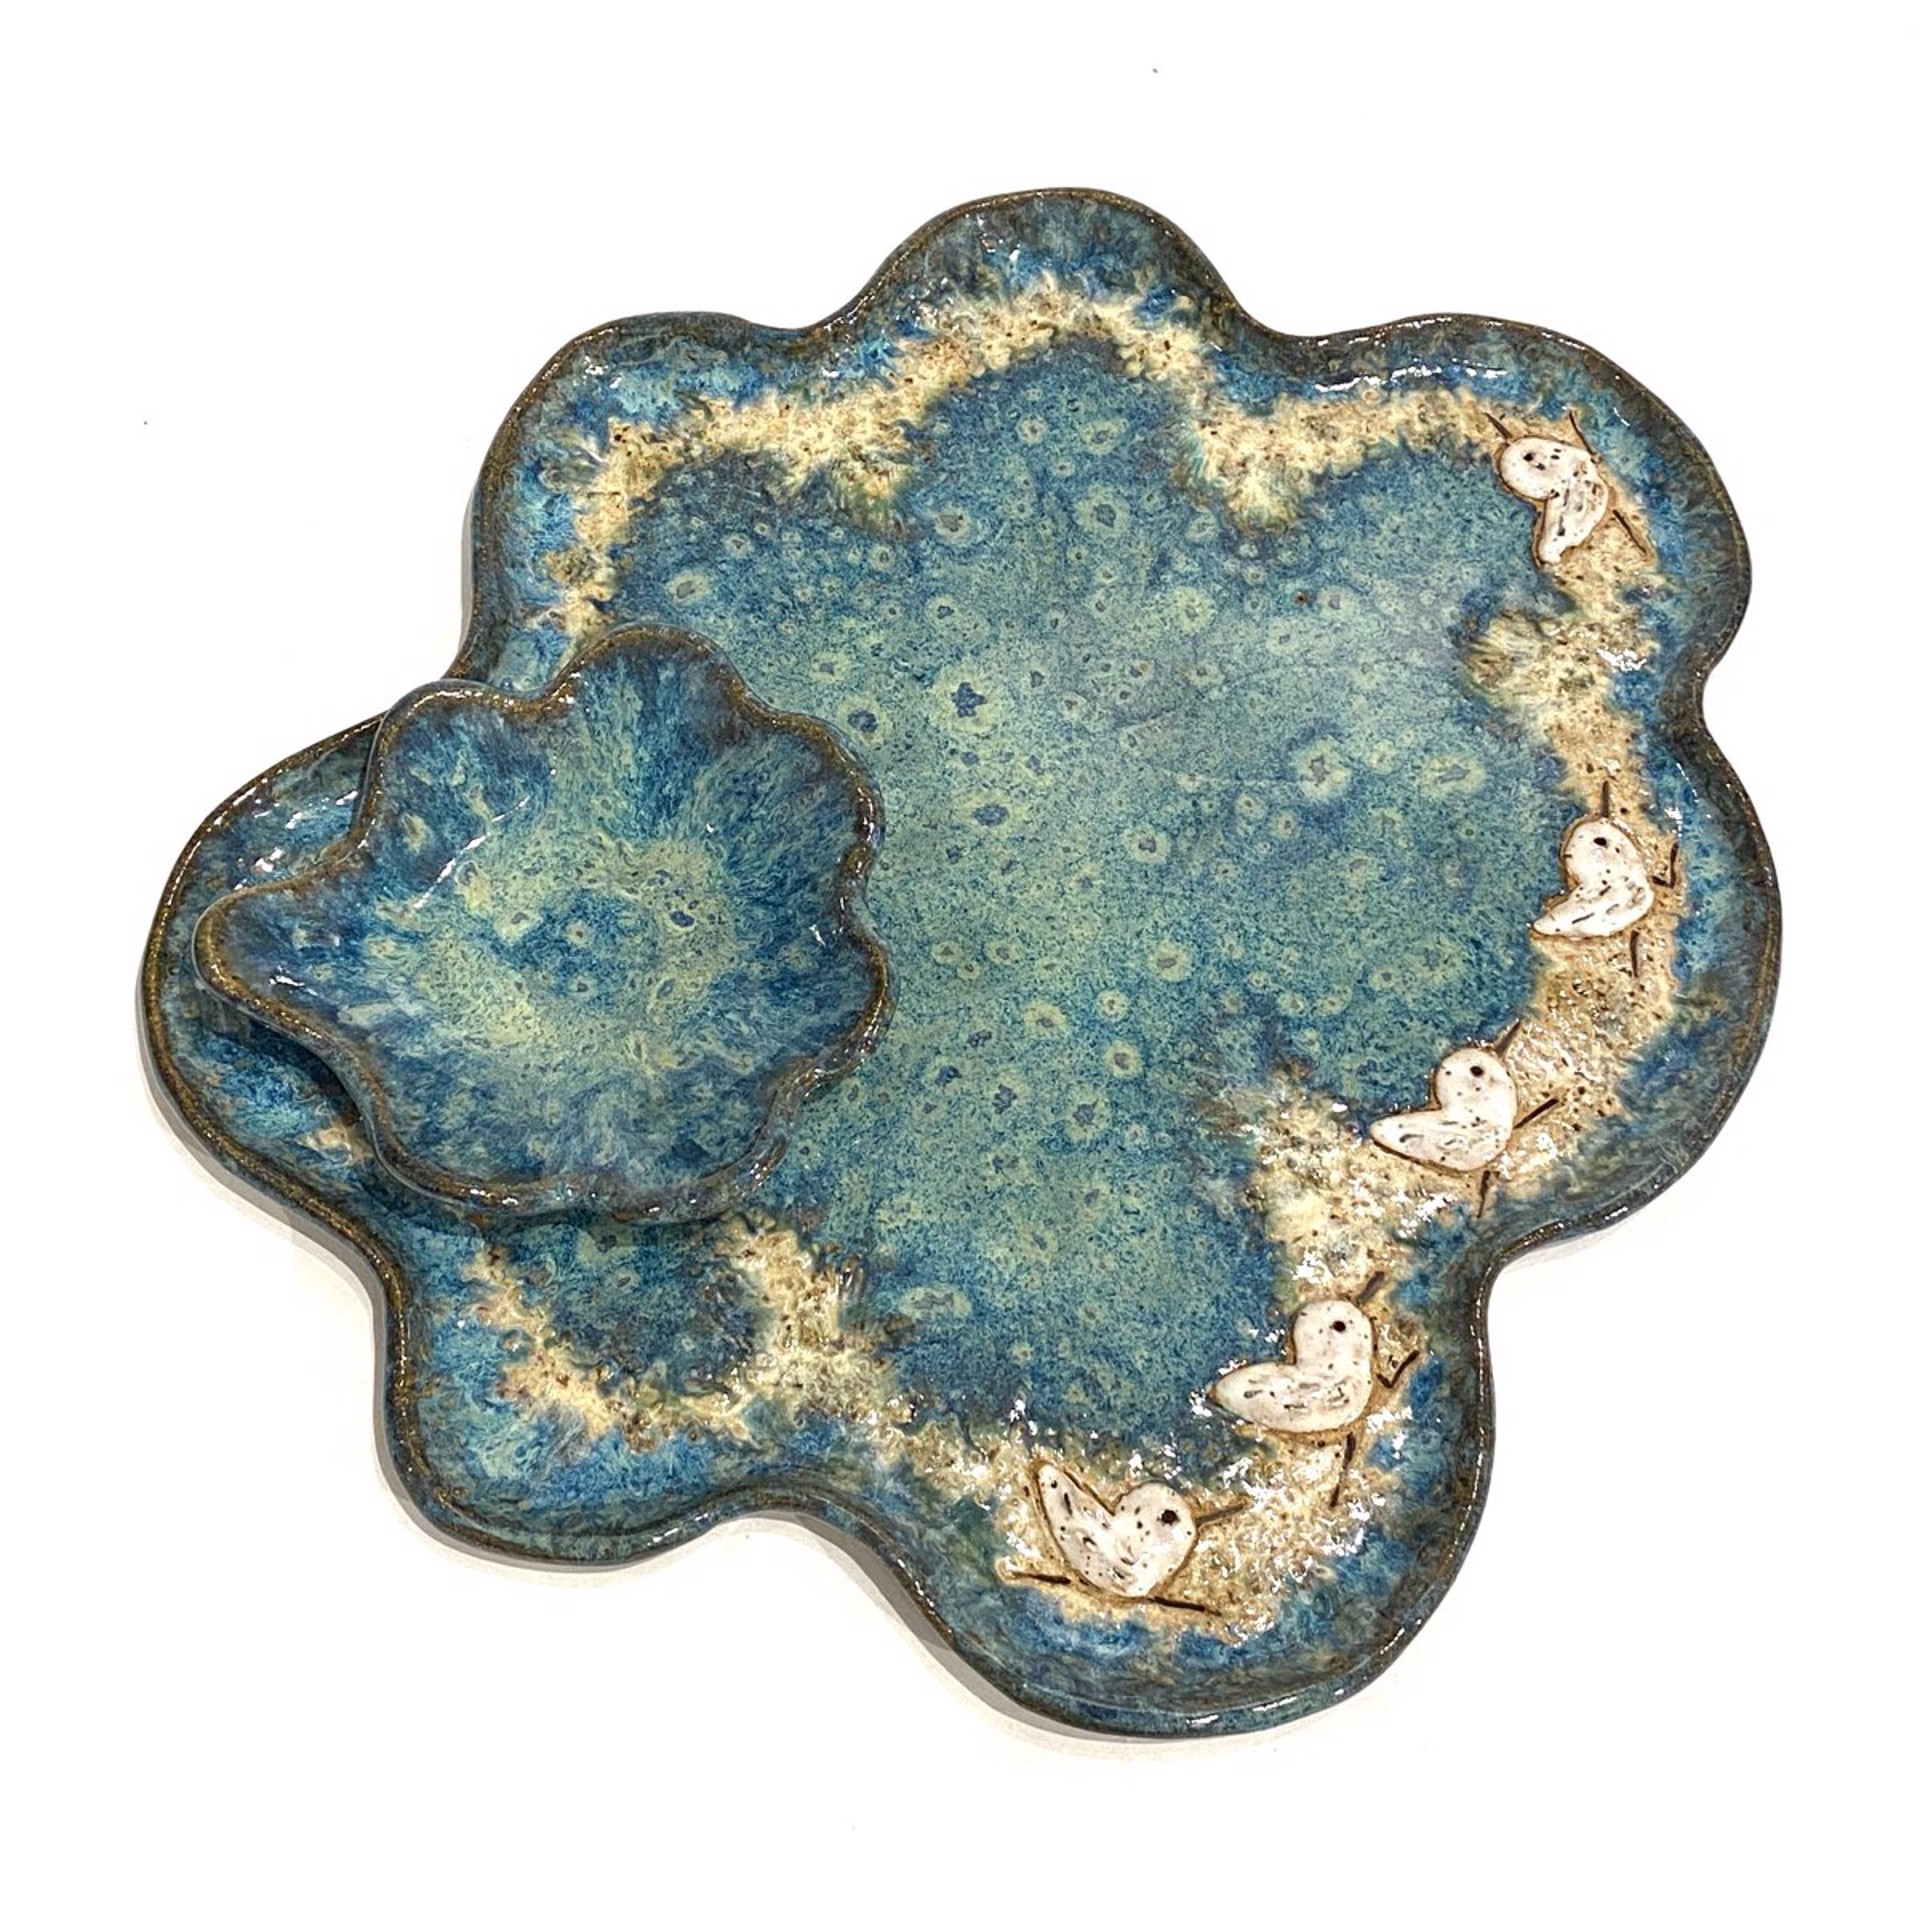 LG23-991  Chip N Dip with Five Sandpipers (Blue Glaze) by Jim & Steffi Logan